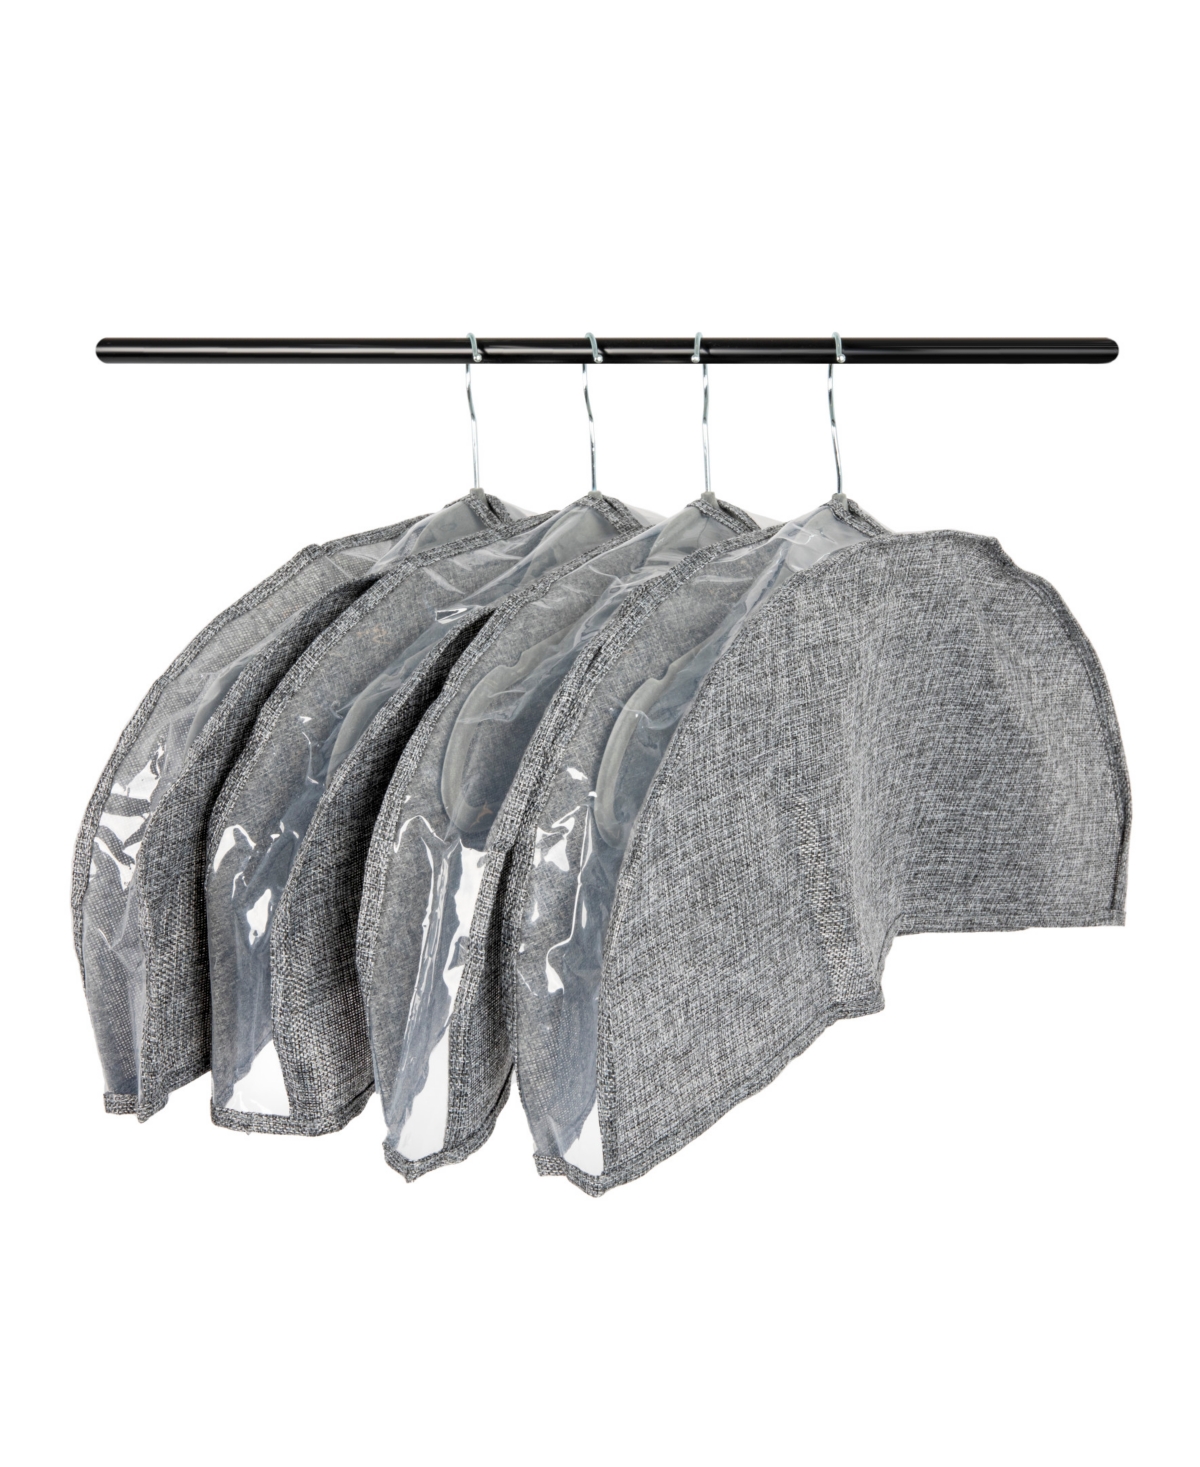 Household Essentials Hanging Garment Shoulder Dust Covers For Closet, Set Of 4 In Gray